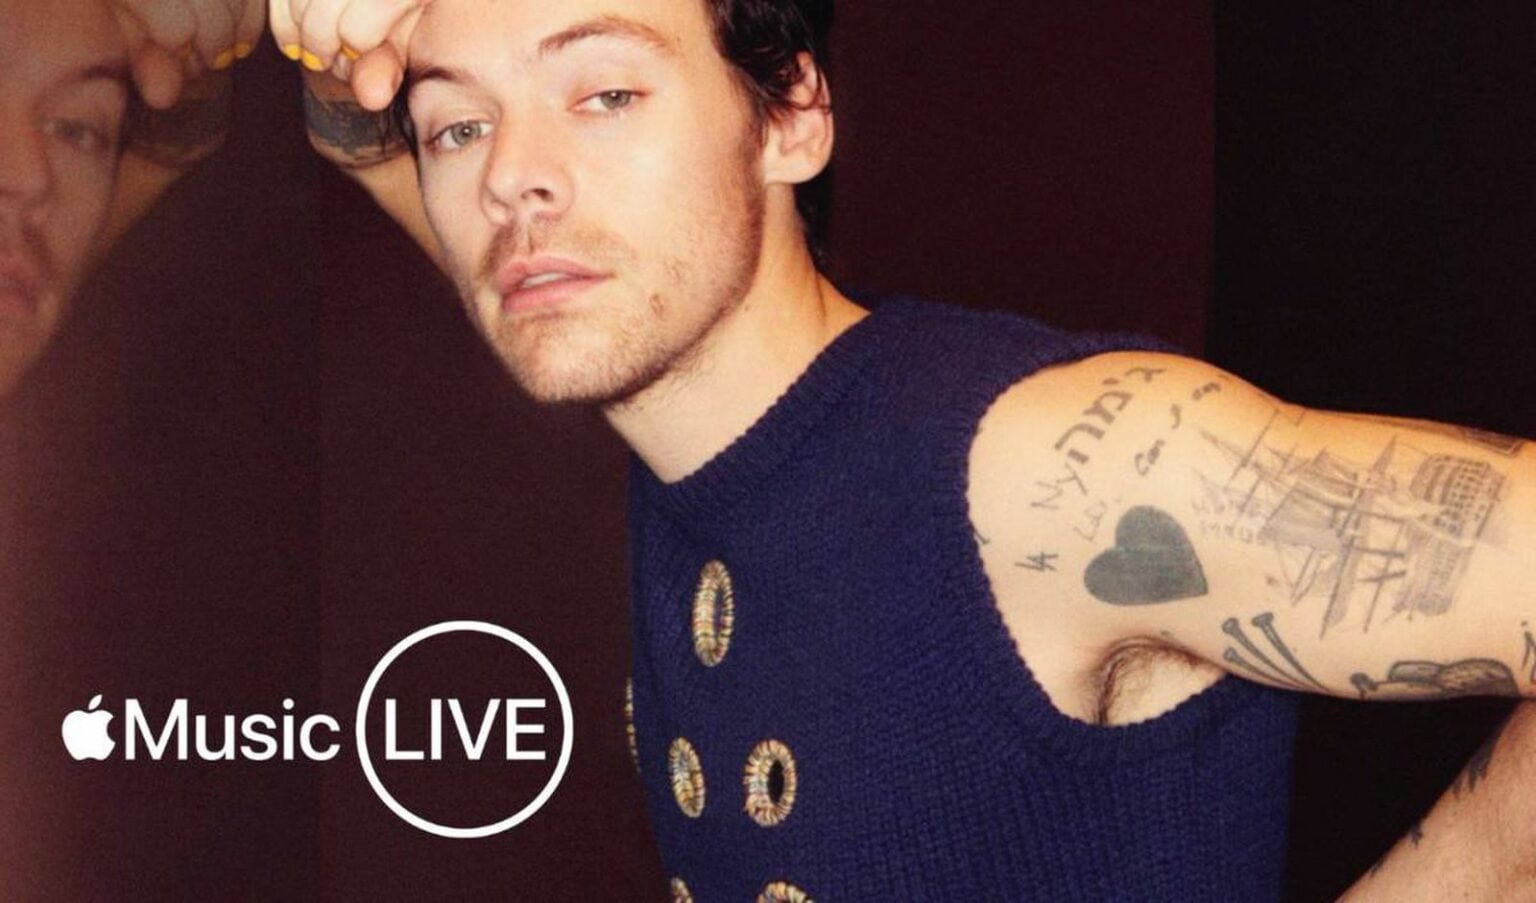 The first show in the returning Apple Music Live series features Harry Styles on Friday.